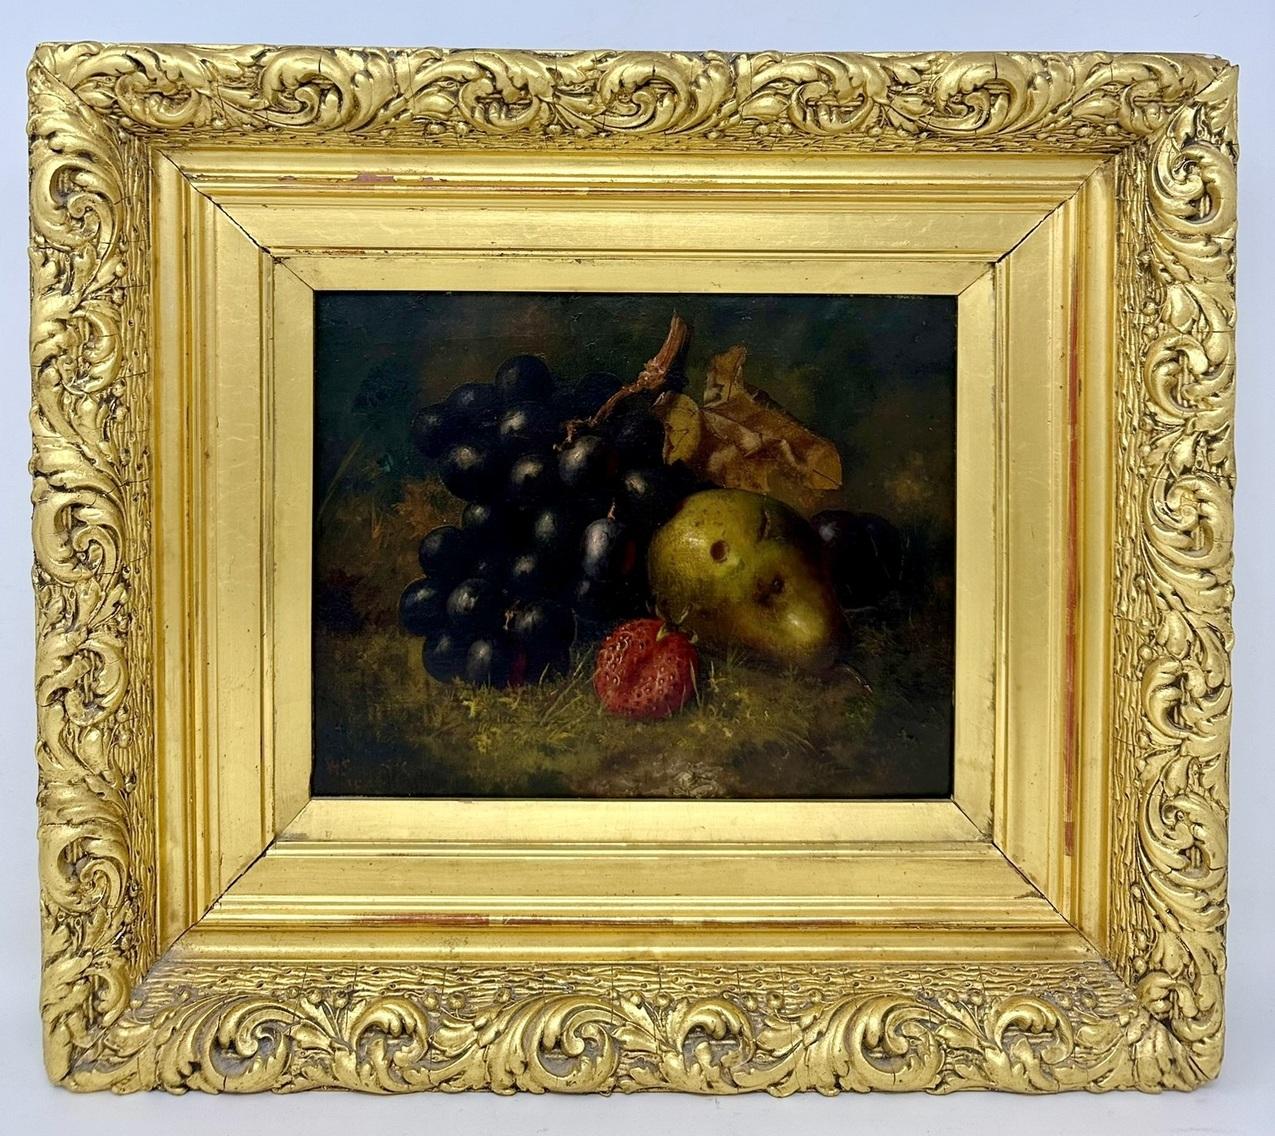 An exceptionally fine quality example of an elaborately framed English Still Life of fruits Oil Painting on canvas, in the style of Oliver Clare or Eloise Harriet Stannard, second quarter of the Nineteenth Century, possibly earlier. Complete with